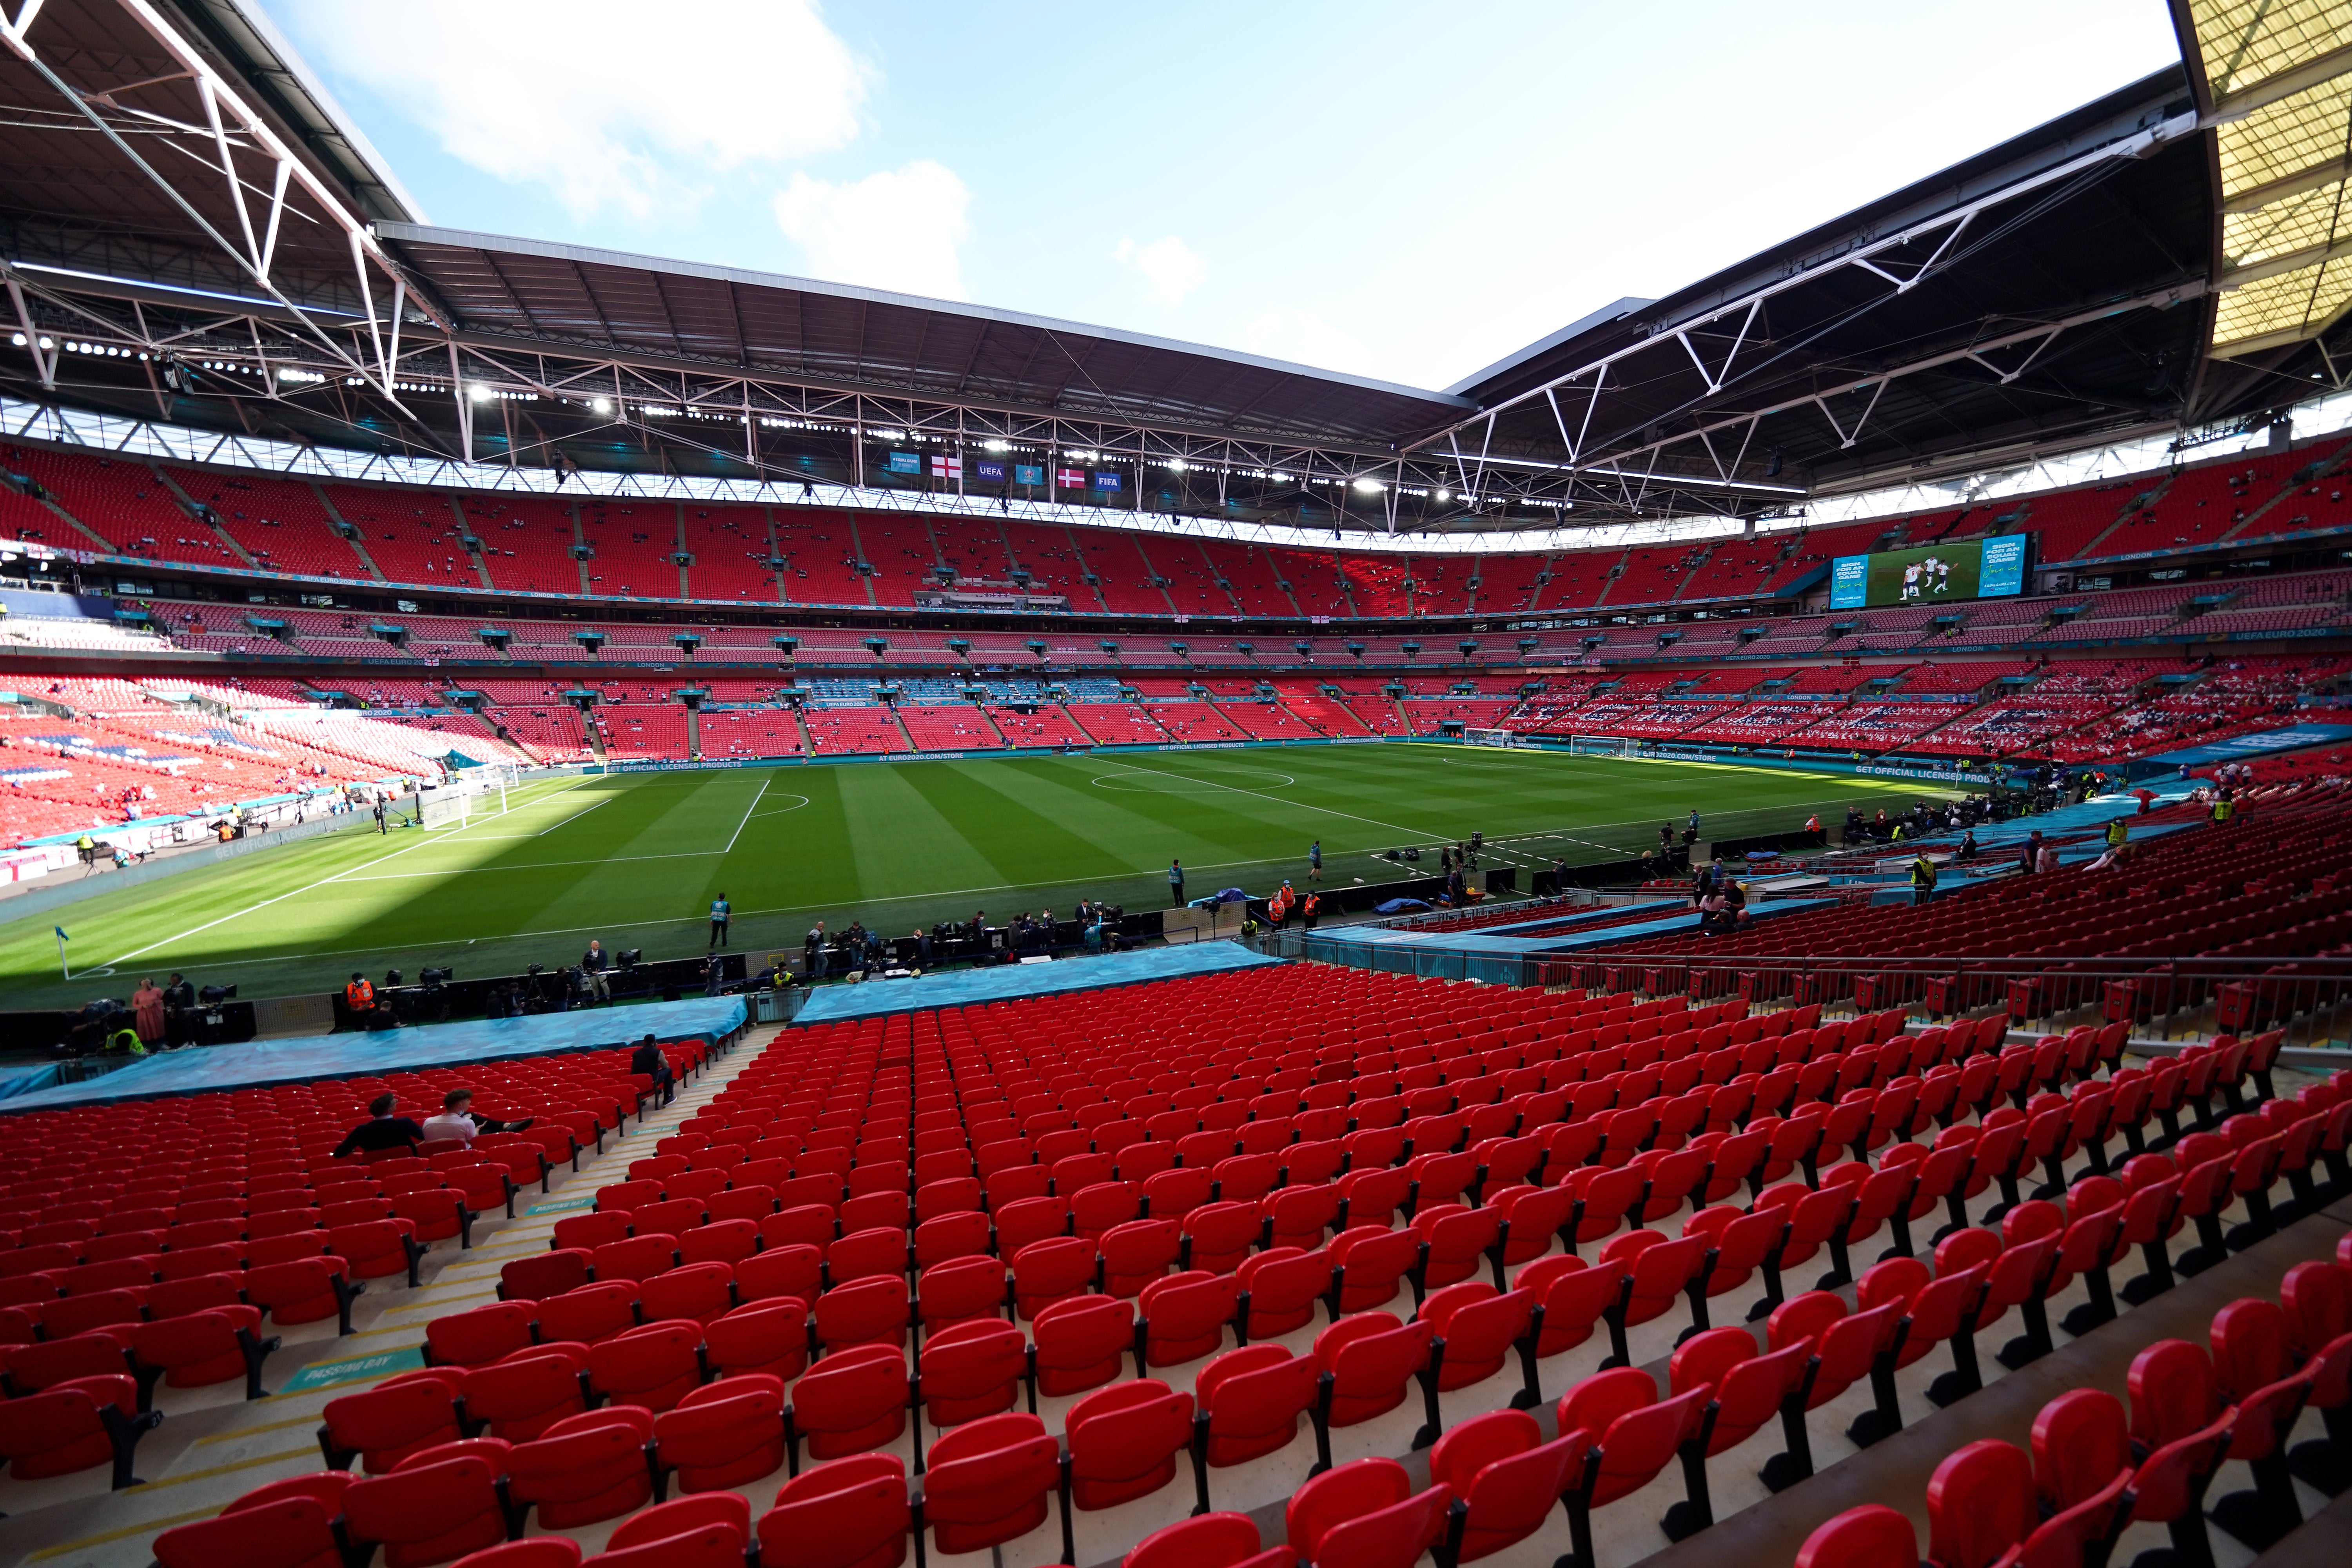 The UK and Ireland’s bid to host Euro 2028 is set to be unopposed, according to reports (Mike Egerton/PA)